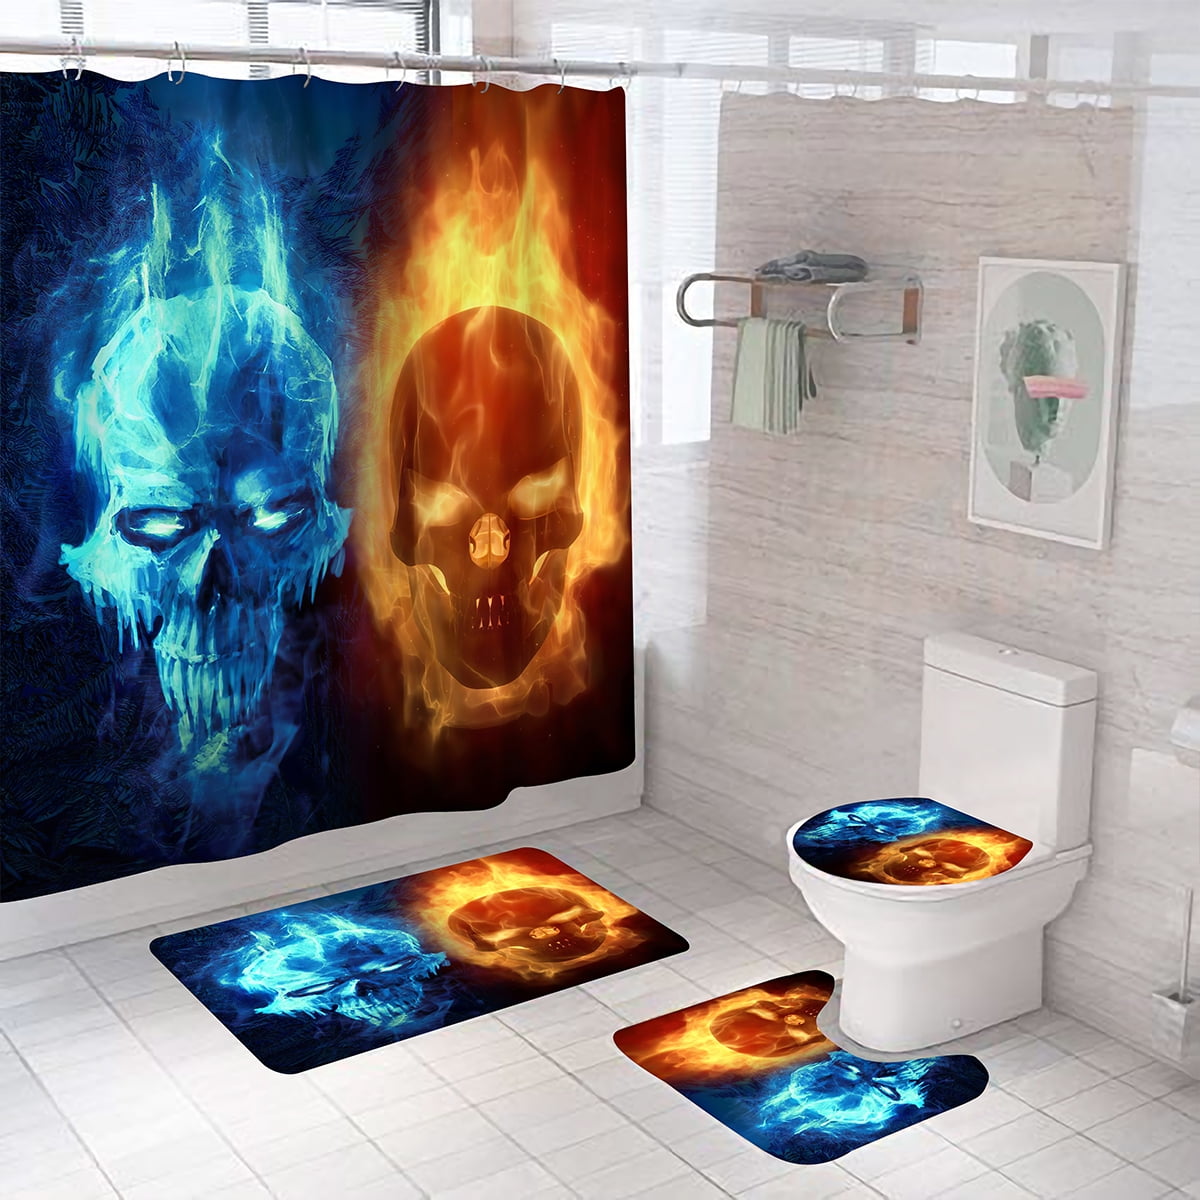 Details about   Blue Stars and Skull Bath Curtains Bathroom Waterproof Fabric Hooks Included 